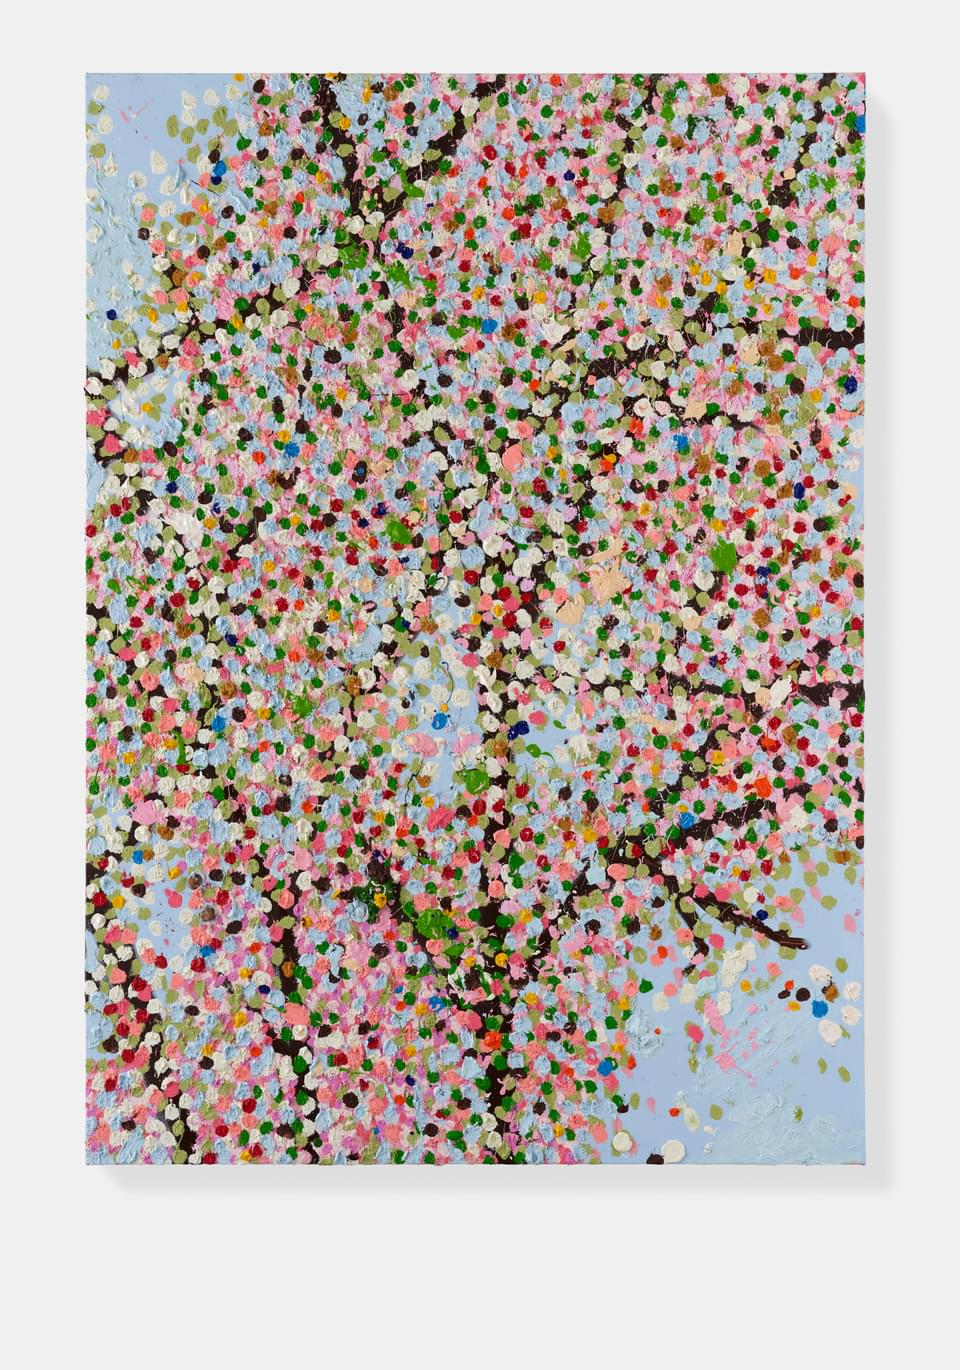 Damien Hirst - Fate's Blossom - 1